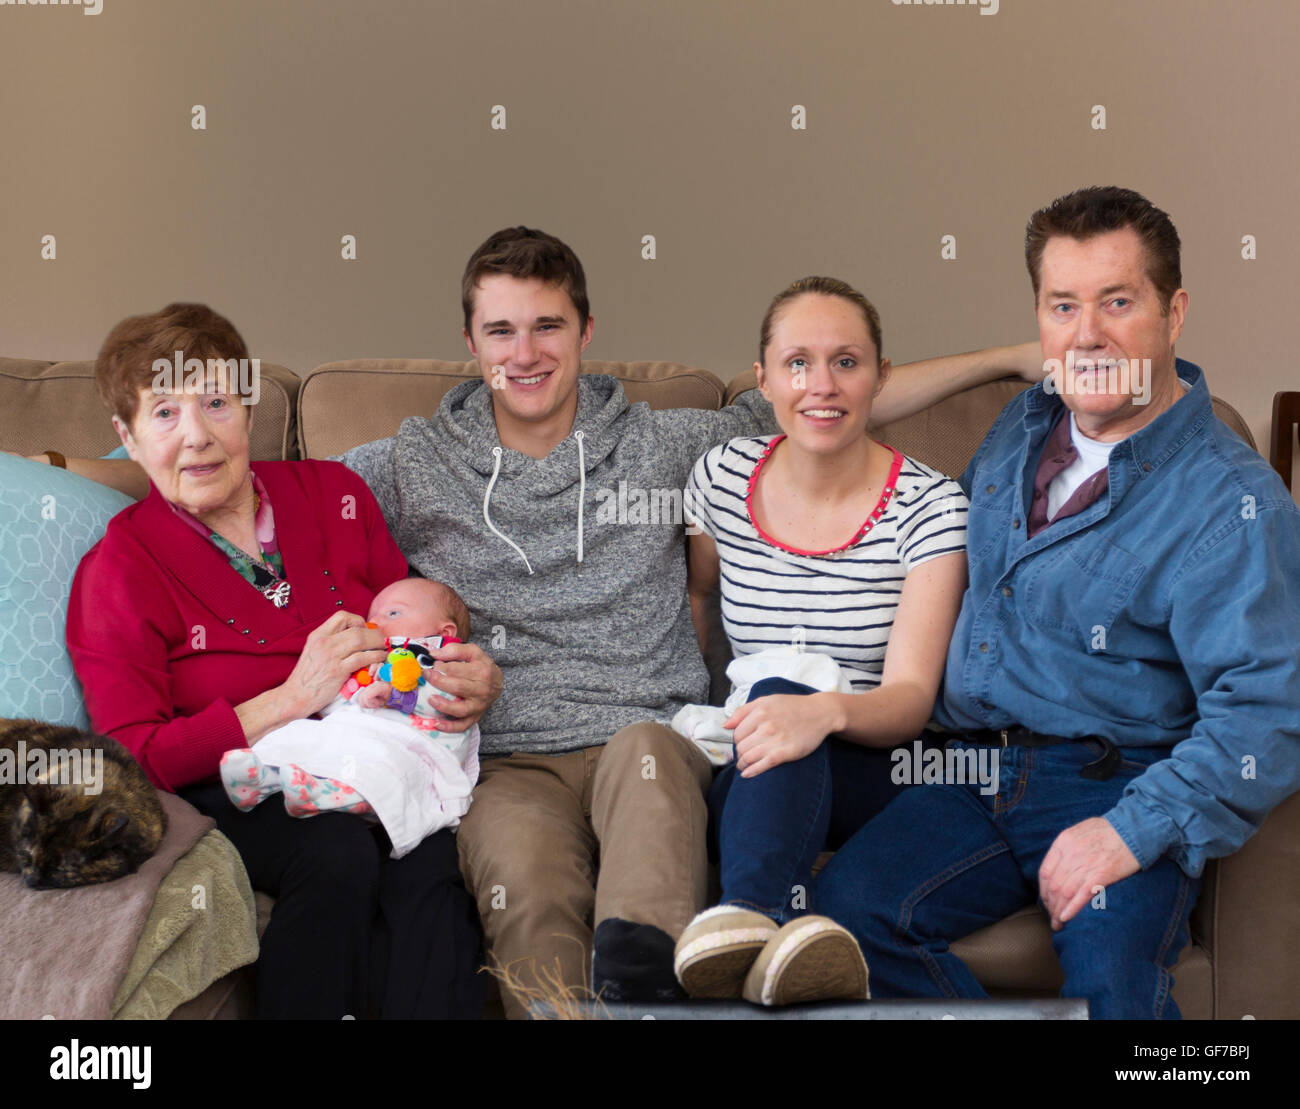 4 generations of people, multi generations of people sitting on sofa with baby Stock Photo